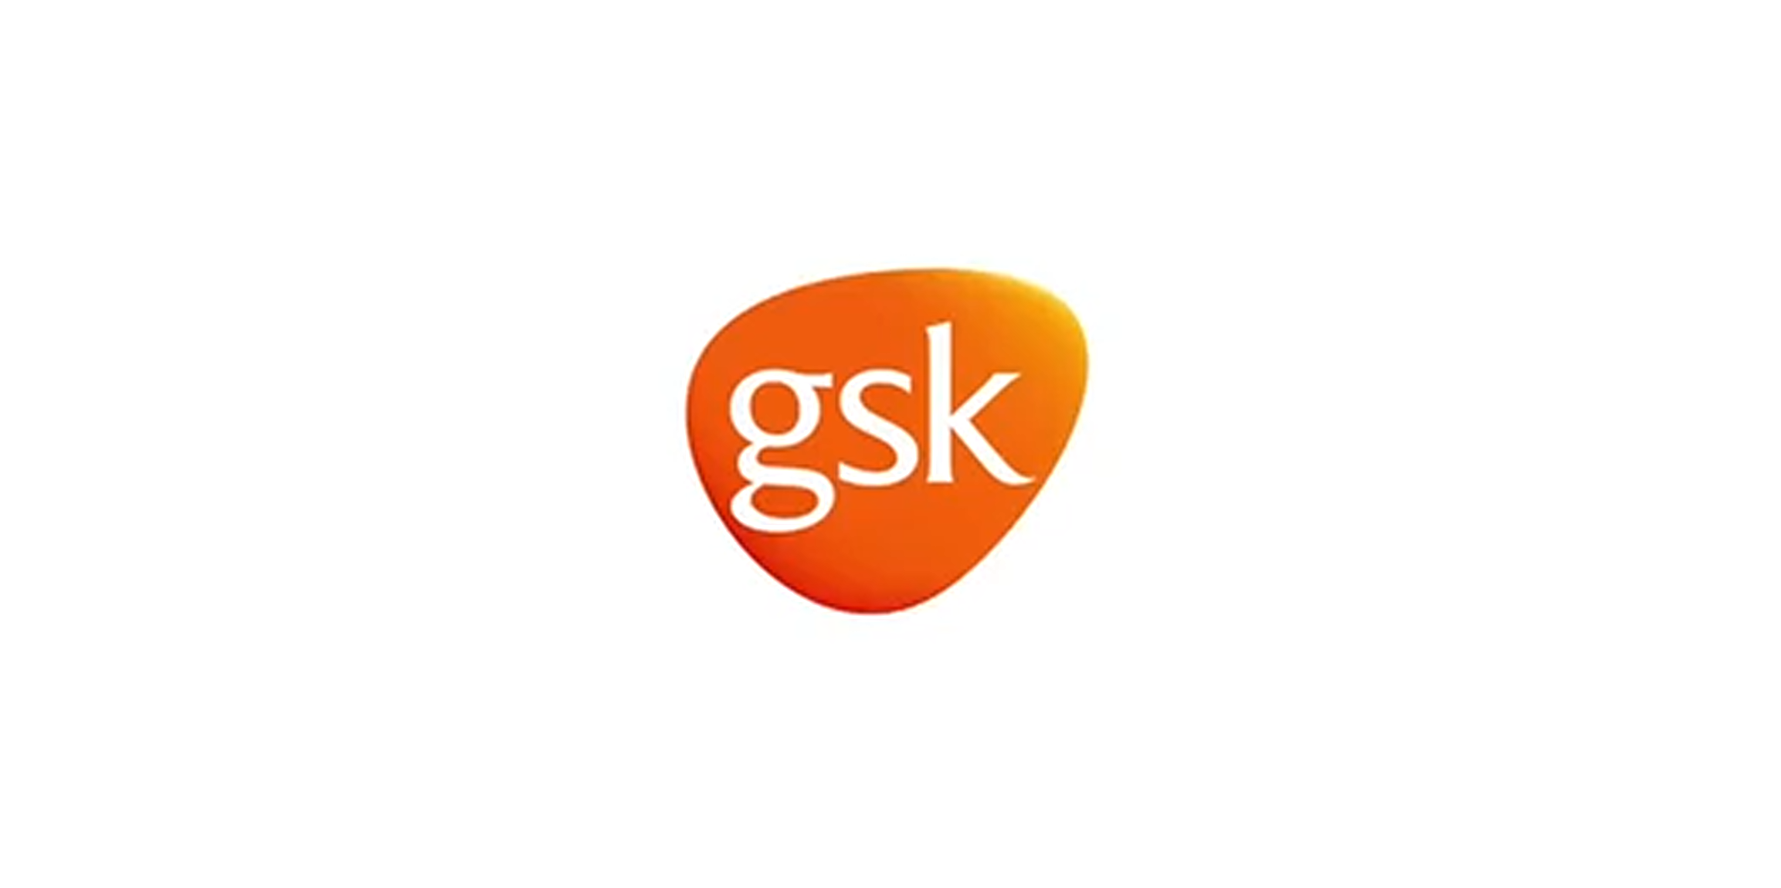 Patrick Vallance, GSK’s head of research, set to become UK’s scientific advisor